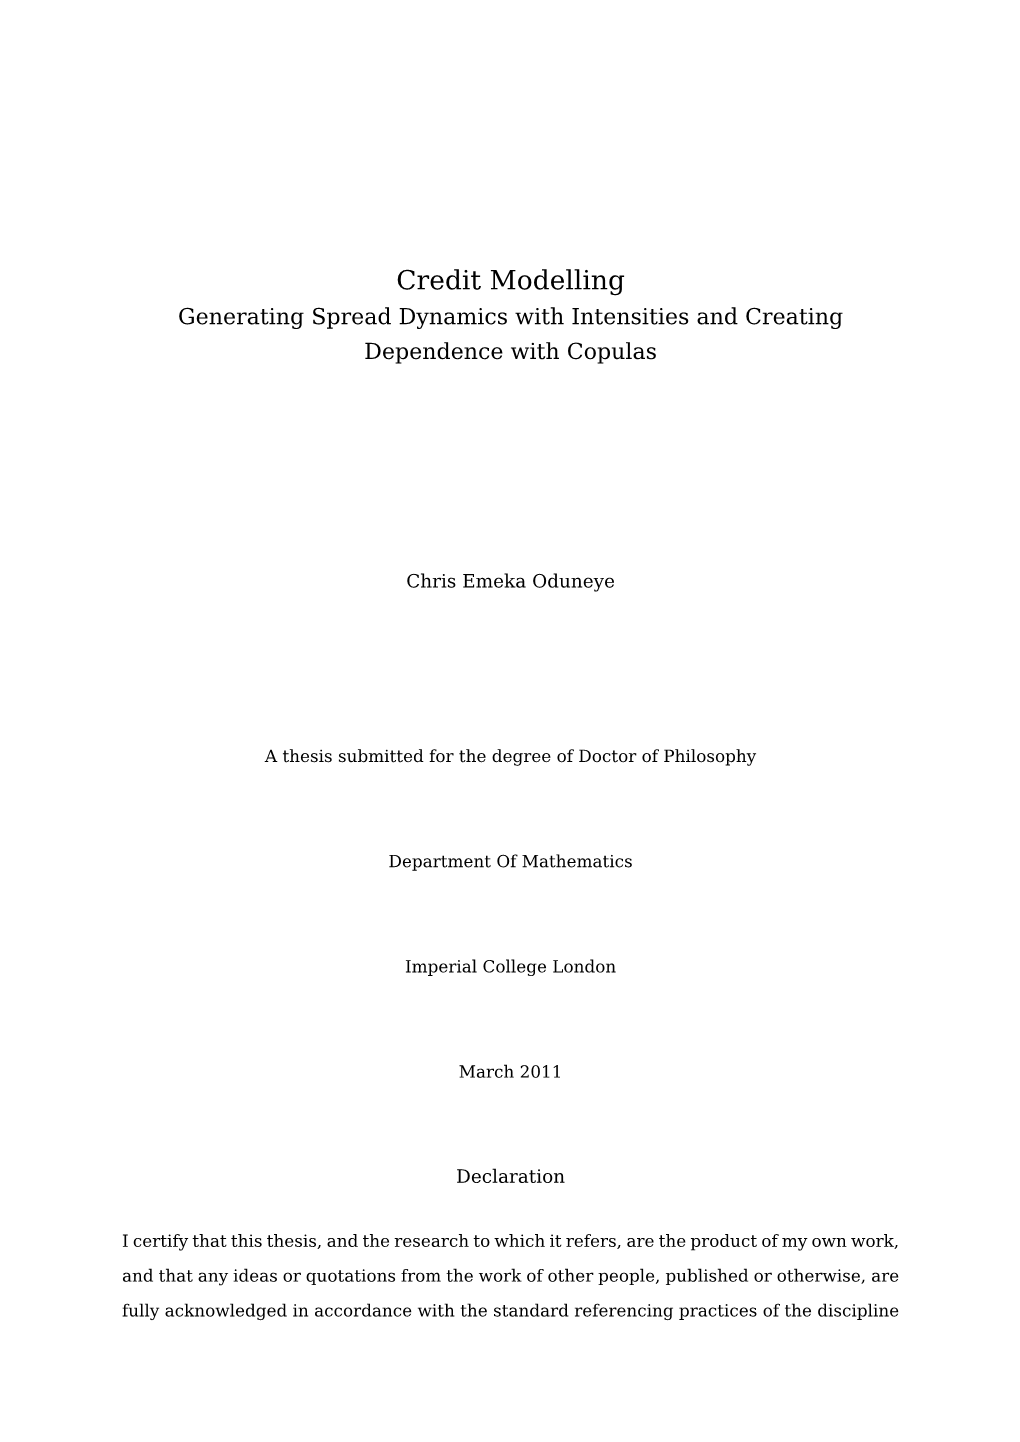 Credit Modelling Generating Spread Dynamics with Intensities and Creating Dependence with Copulas